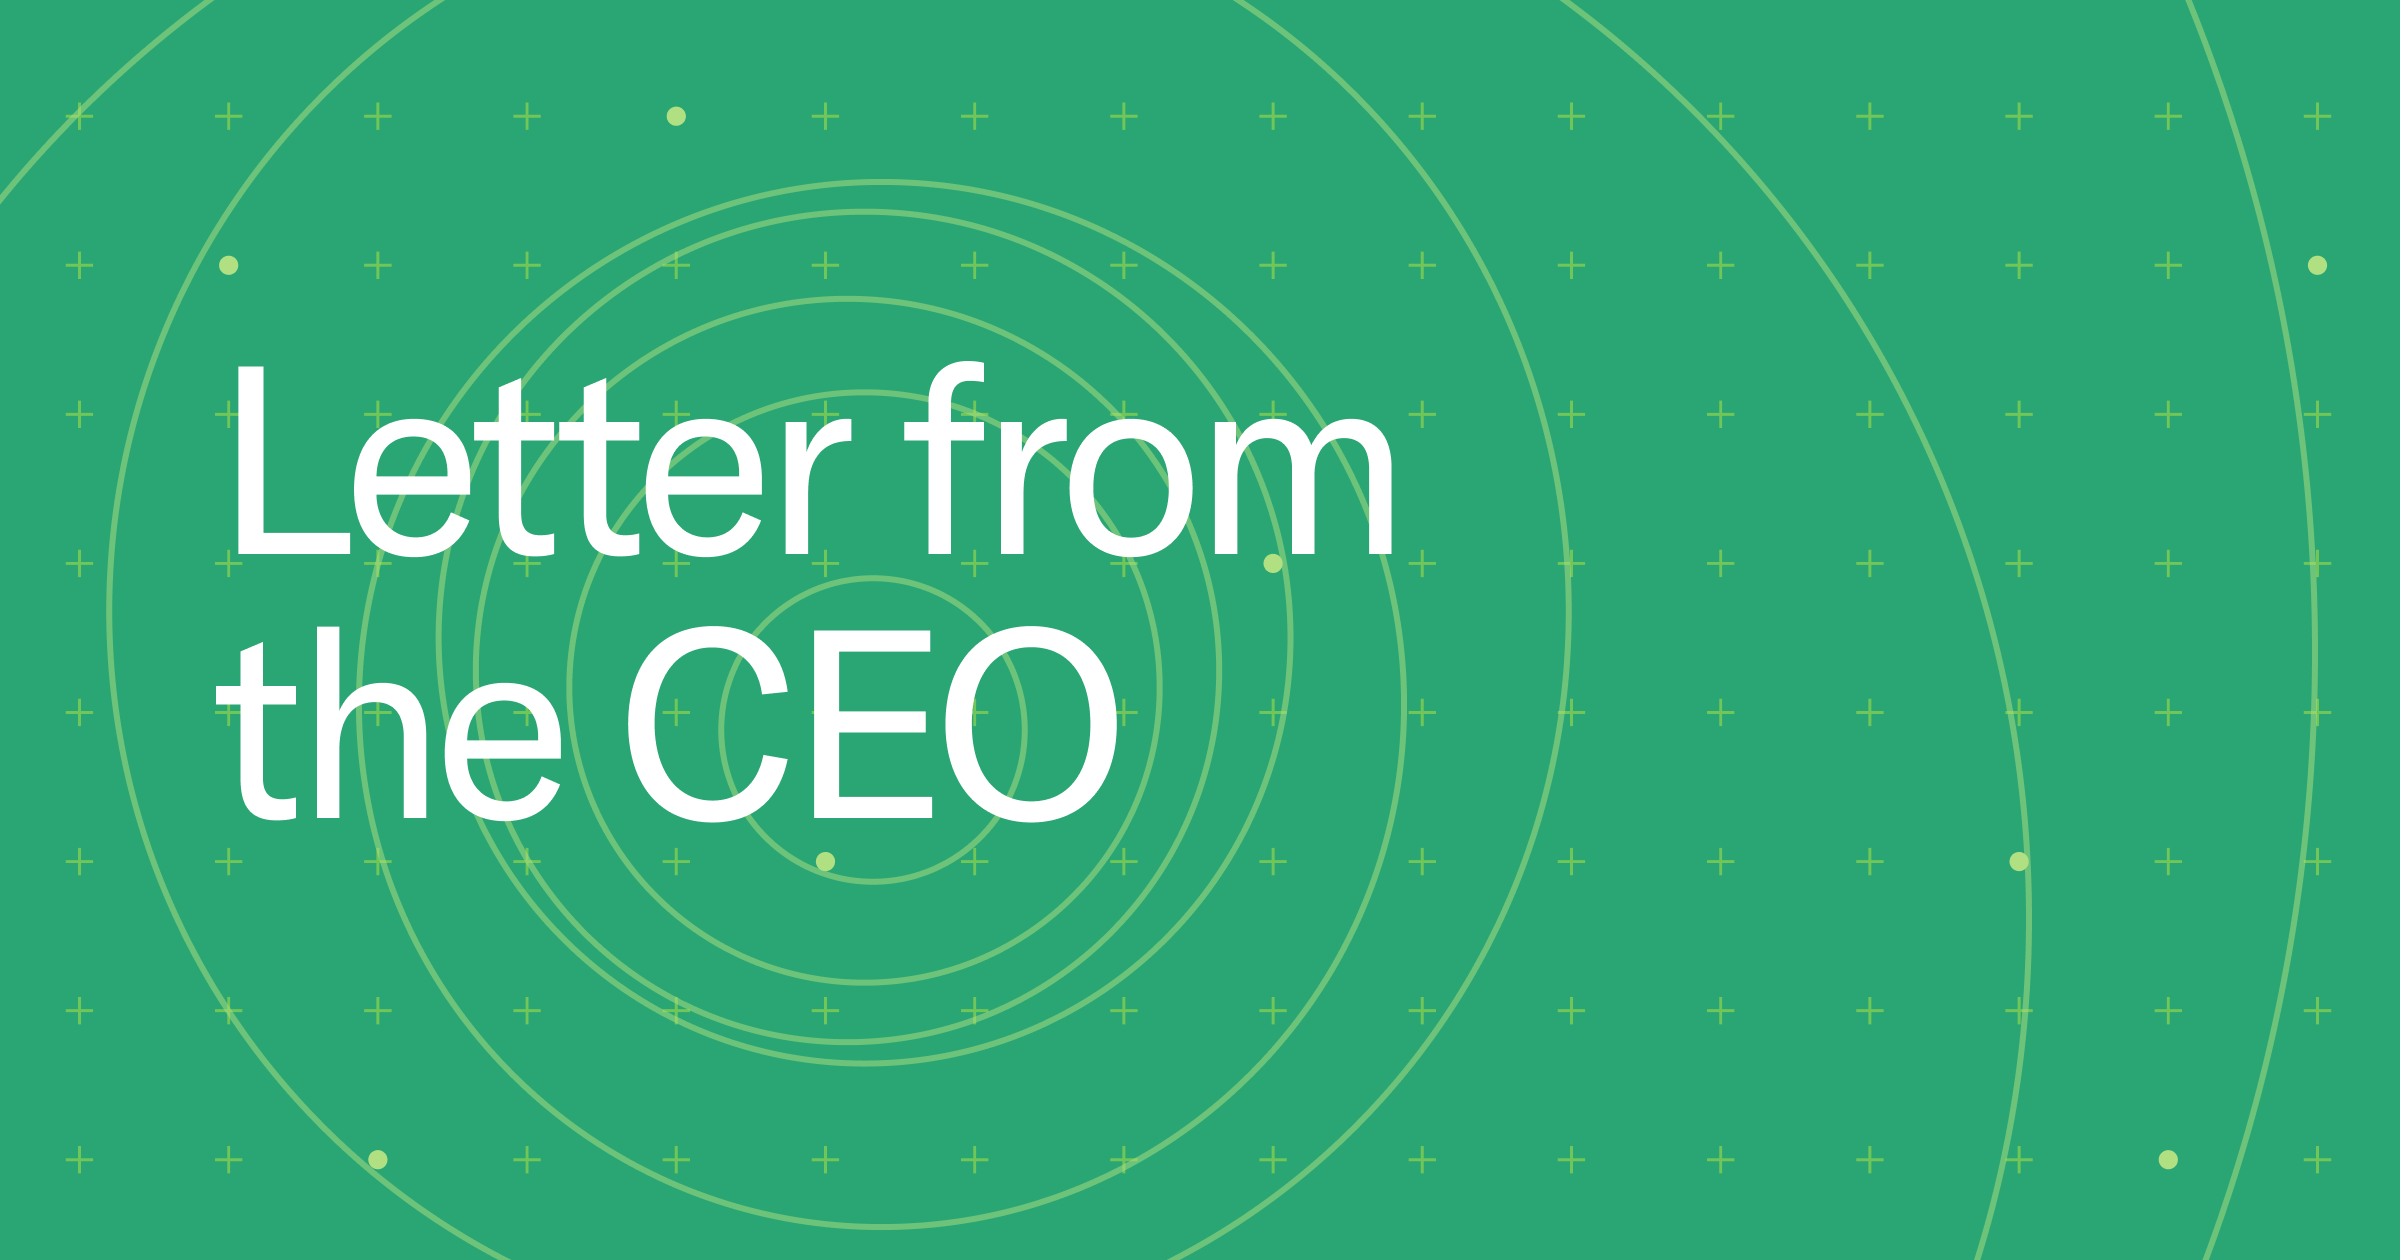 Green background with title reading "Letter from the CEO" in white